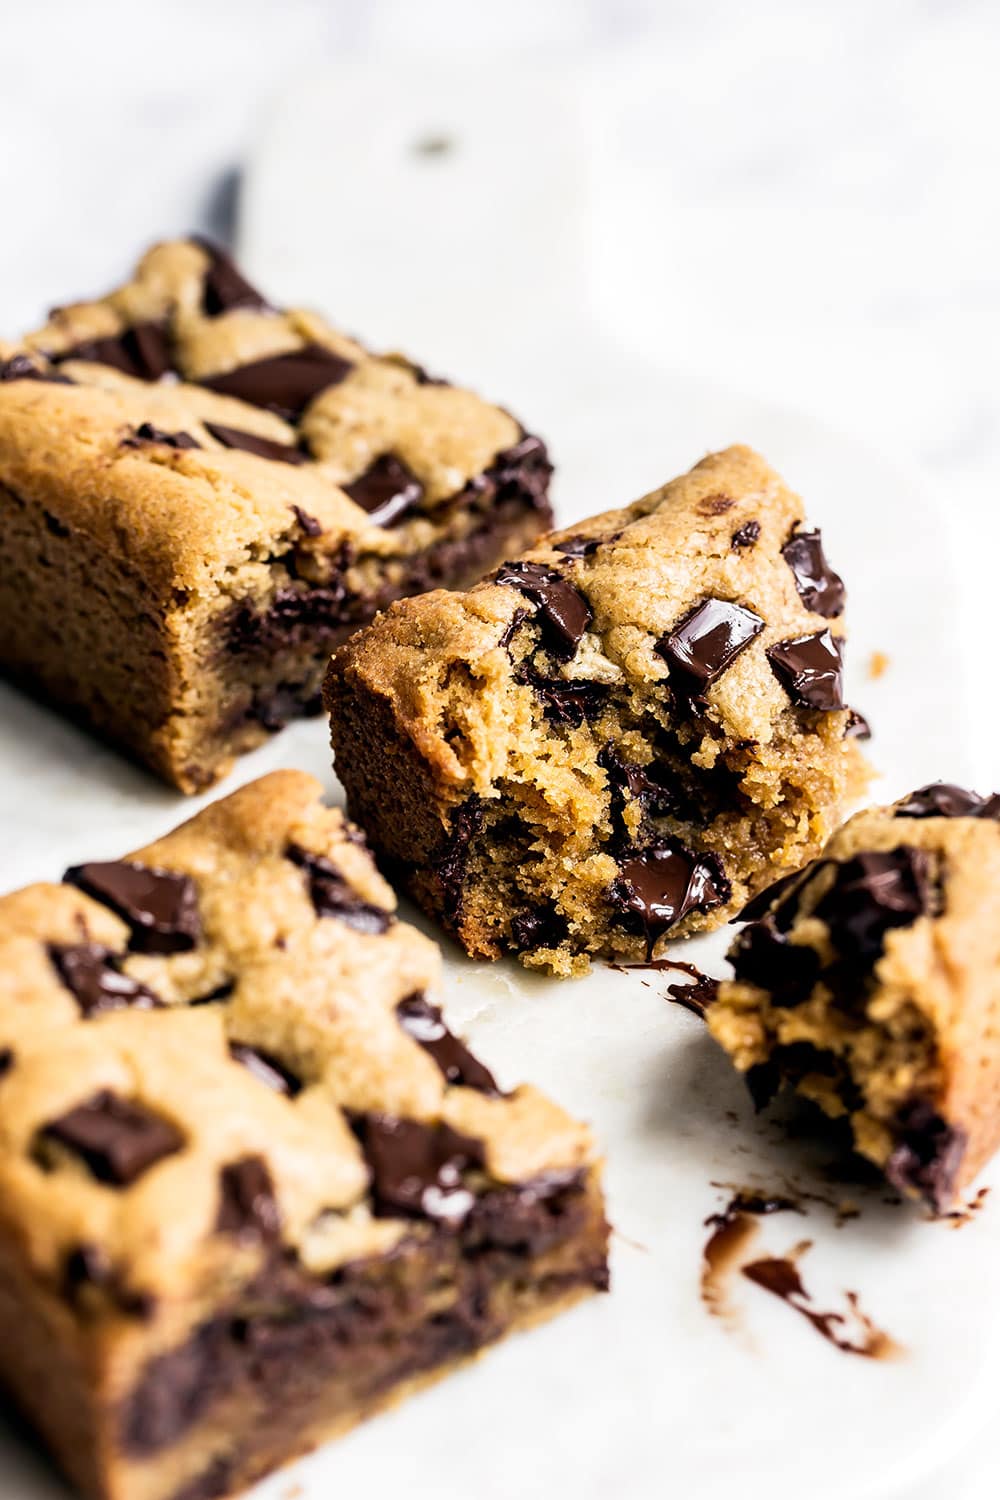 Super thick and chewy peanut butter chocolate chunk cookie bars